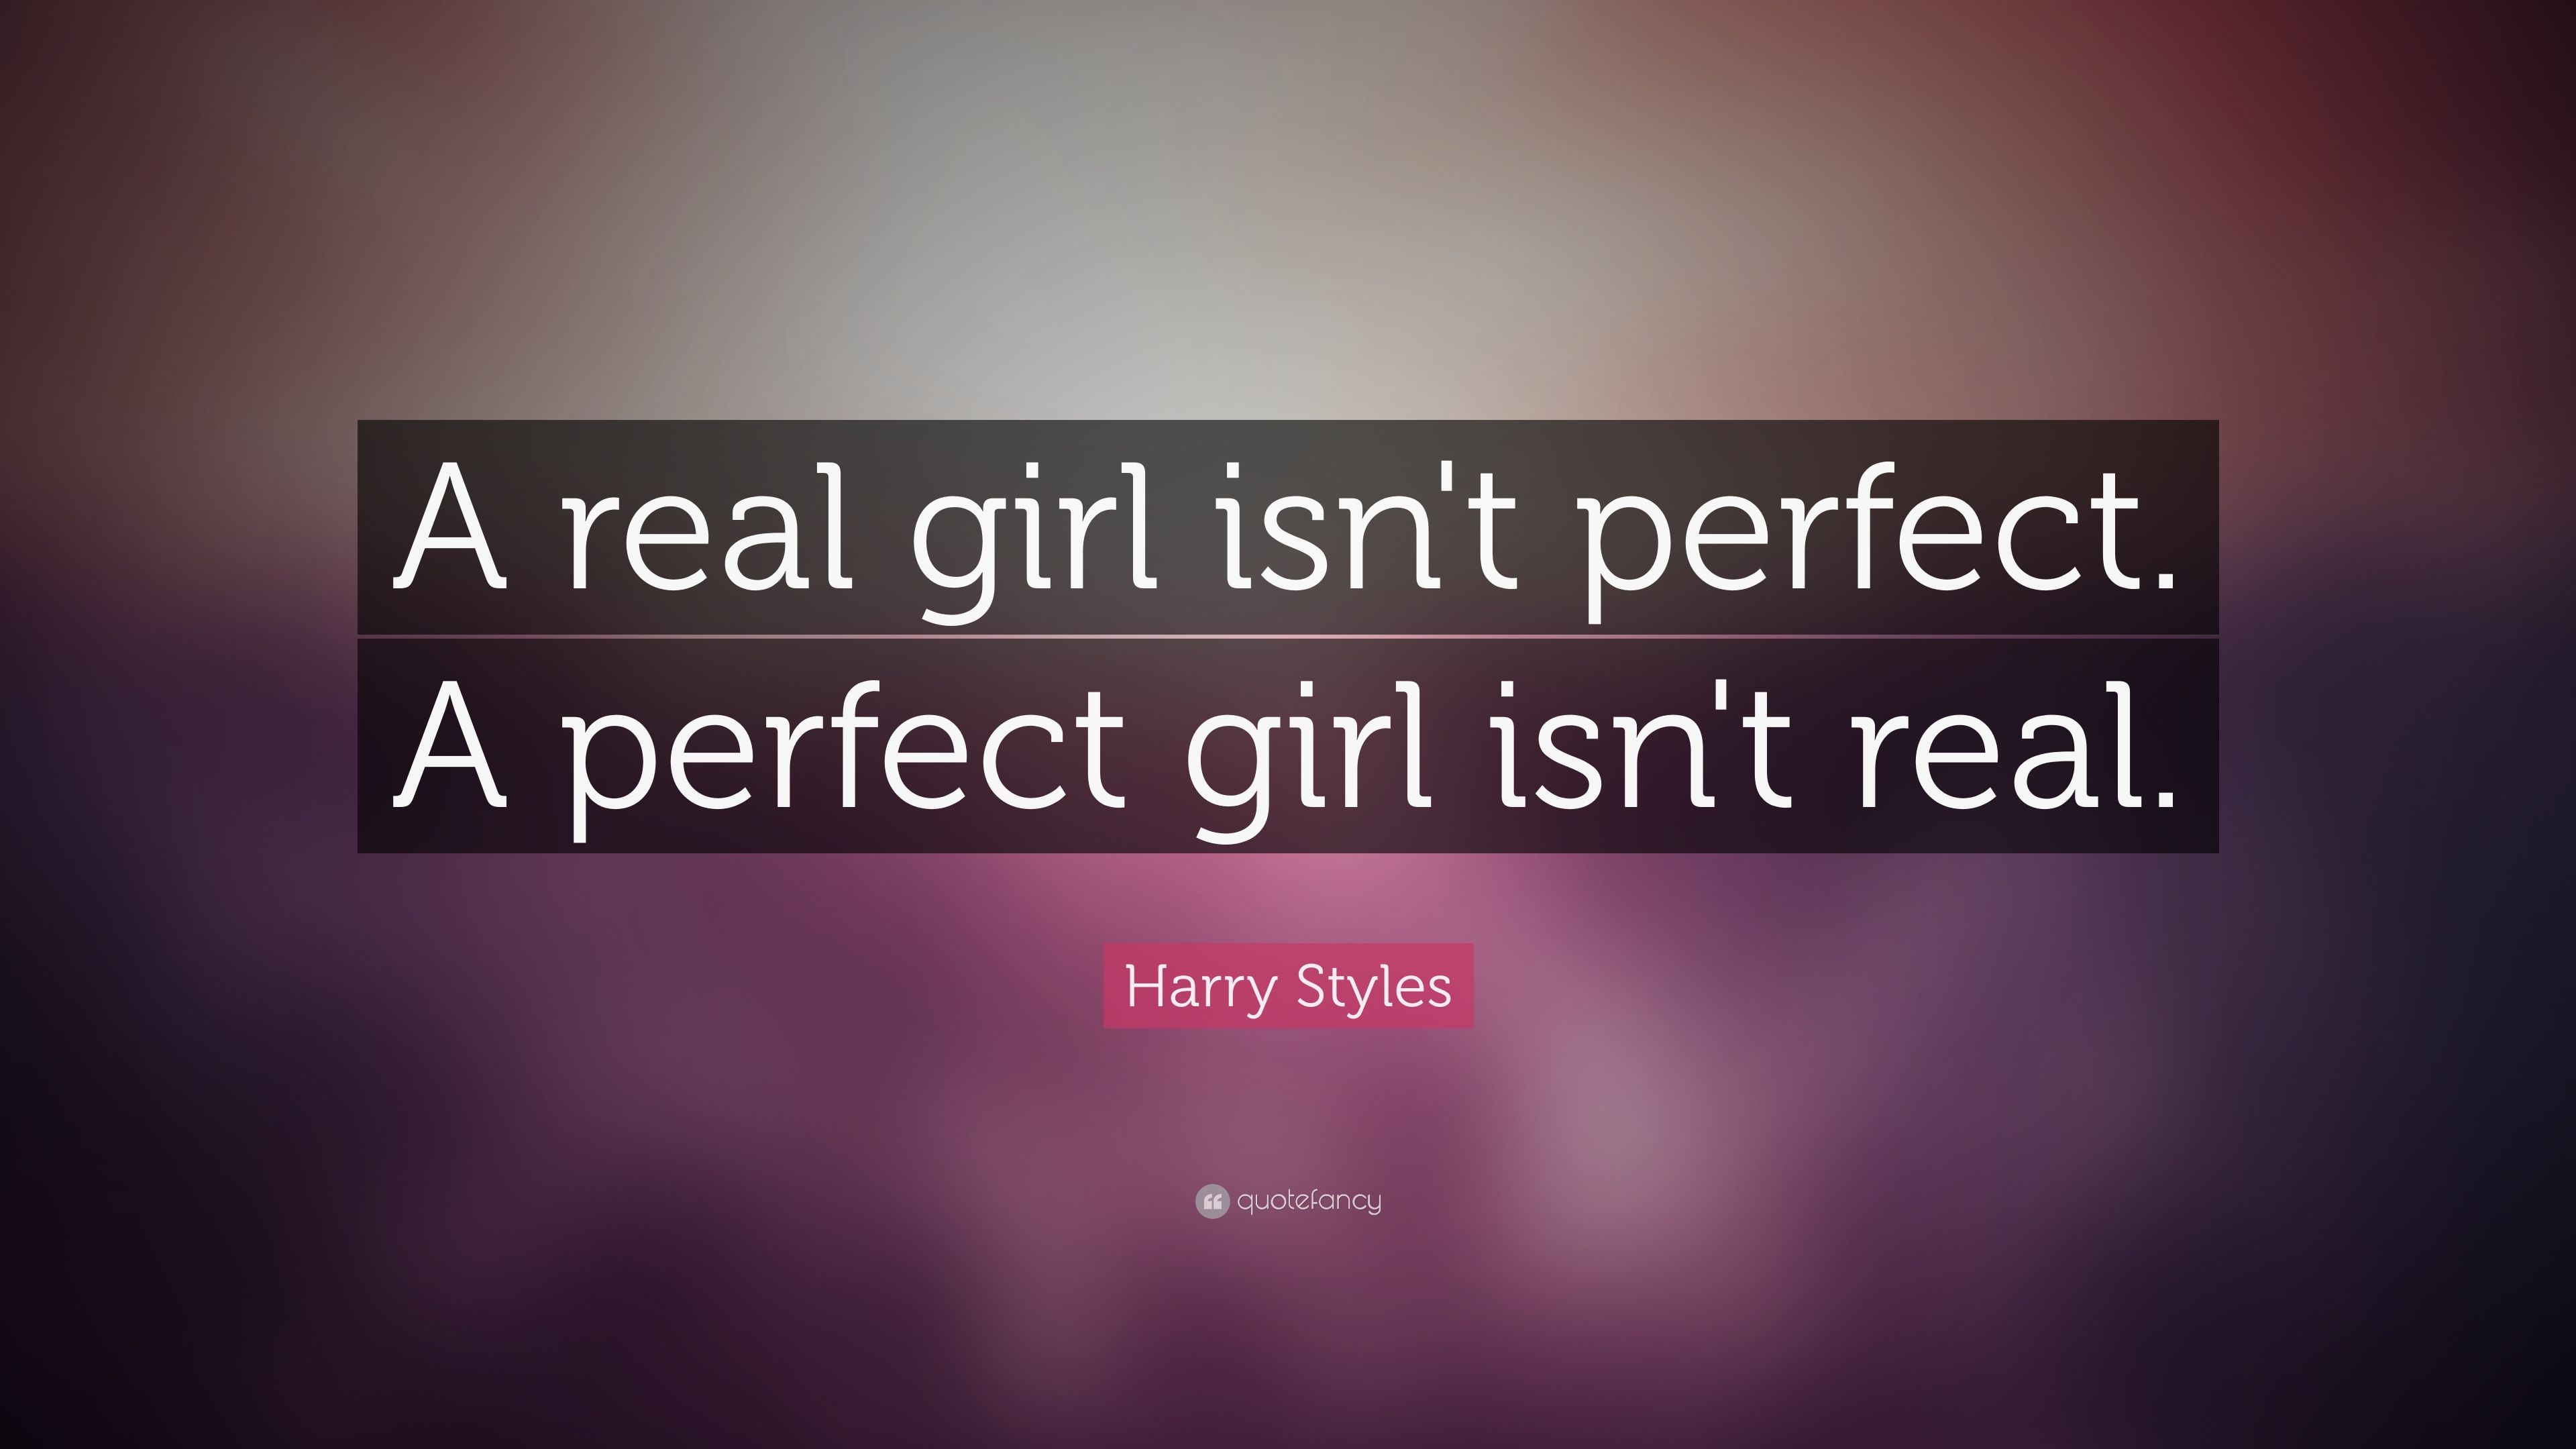 Harry Styles Quote: “A real girl isn't perfect. A perfect girl isn't real.” (15 wallpaper)